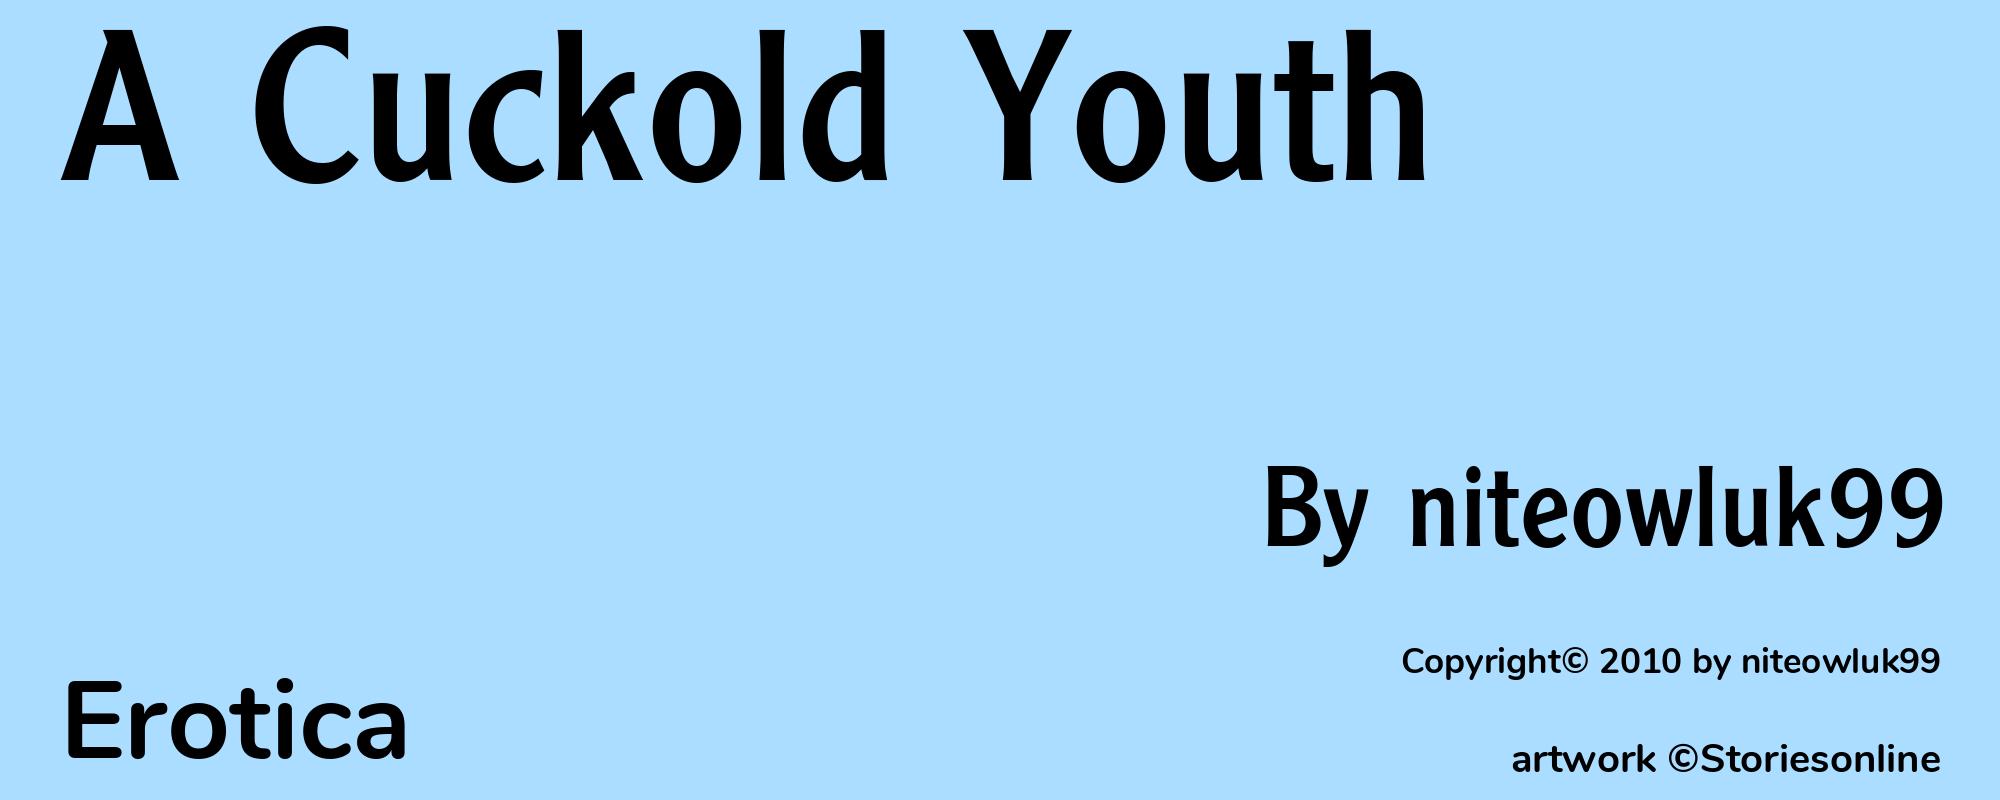 A Cuckold Youth - Cover